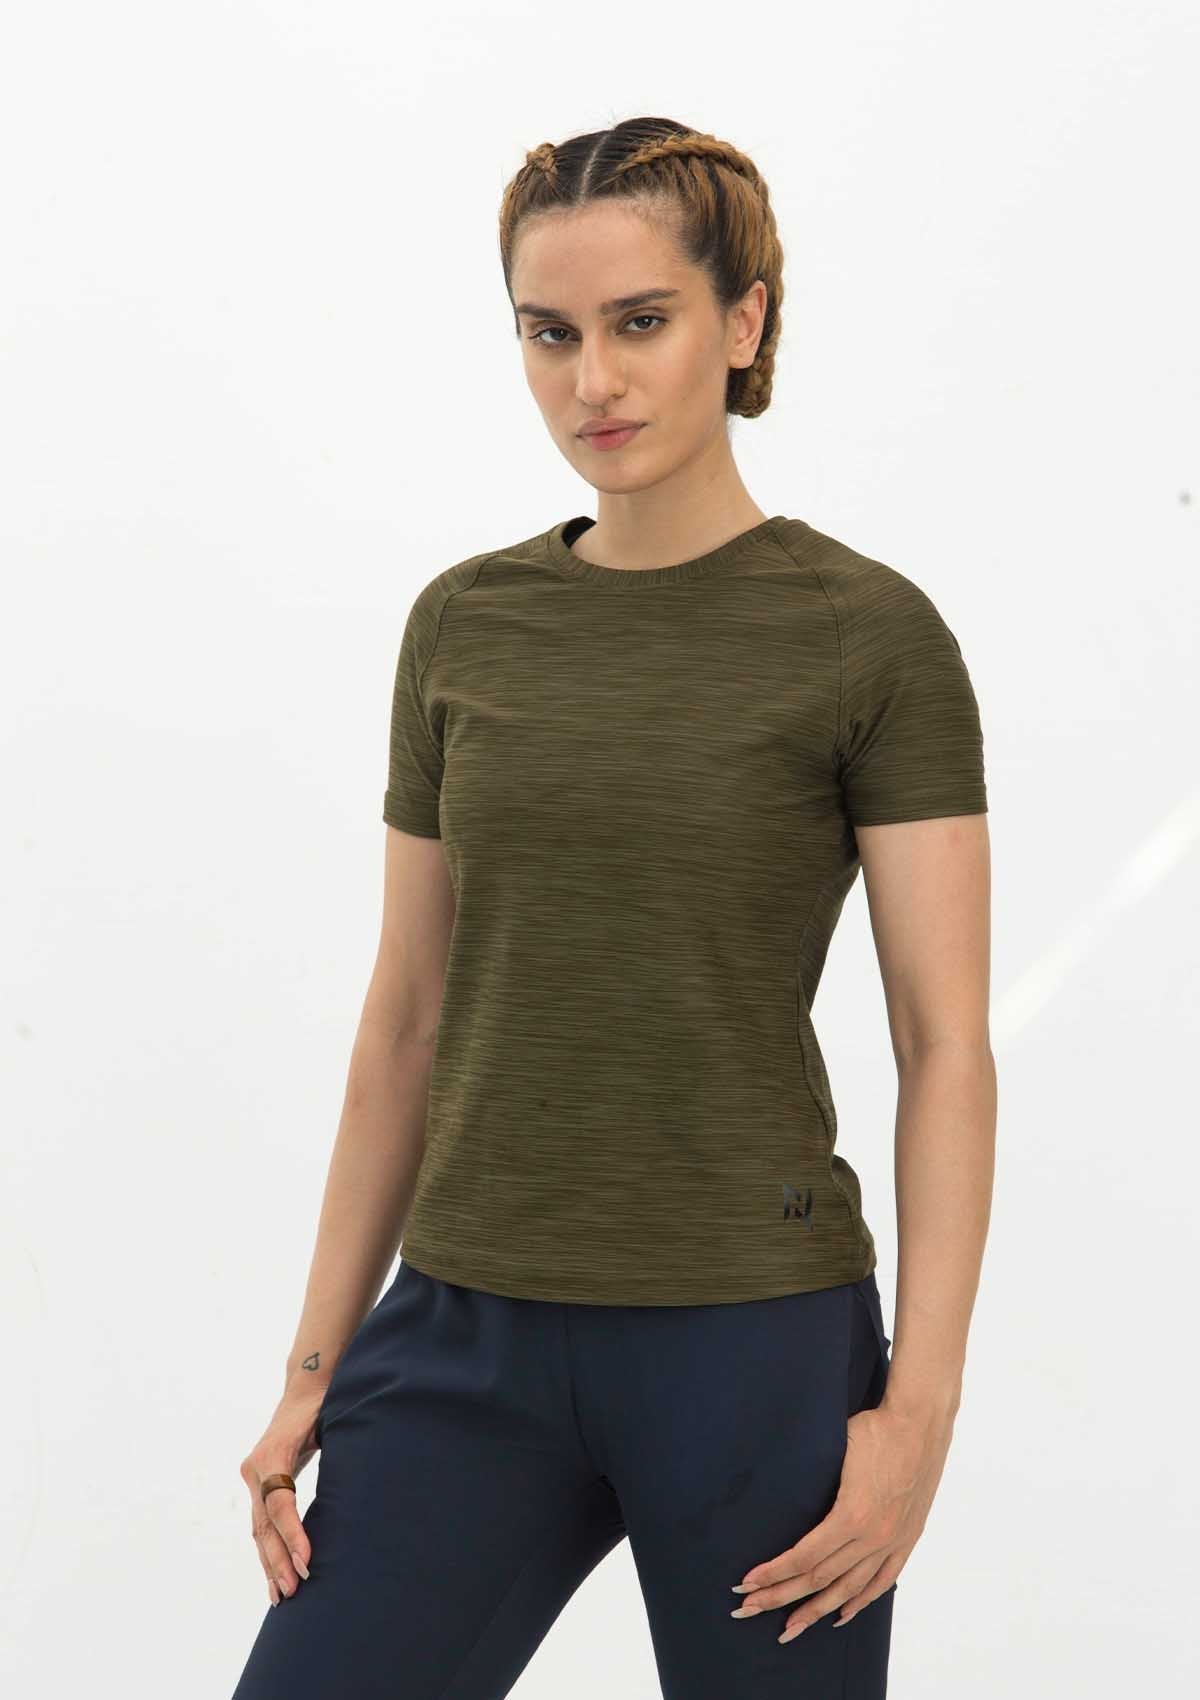 DRY FIT SHORT SLEEVES CREW - OLIVE - Nomad Apparel